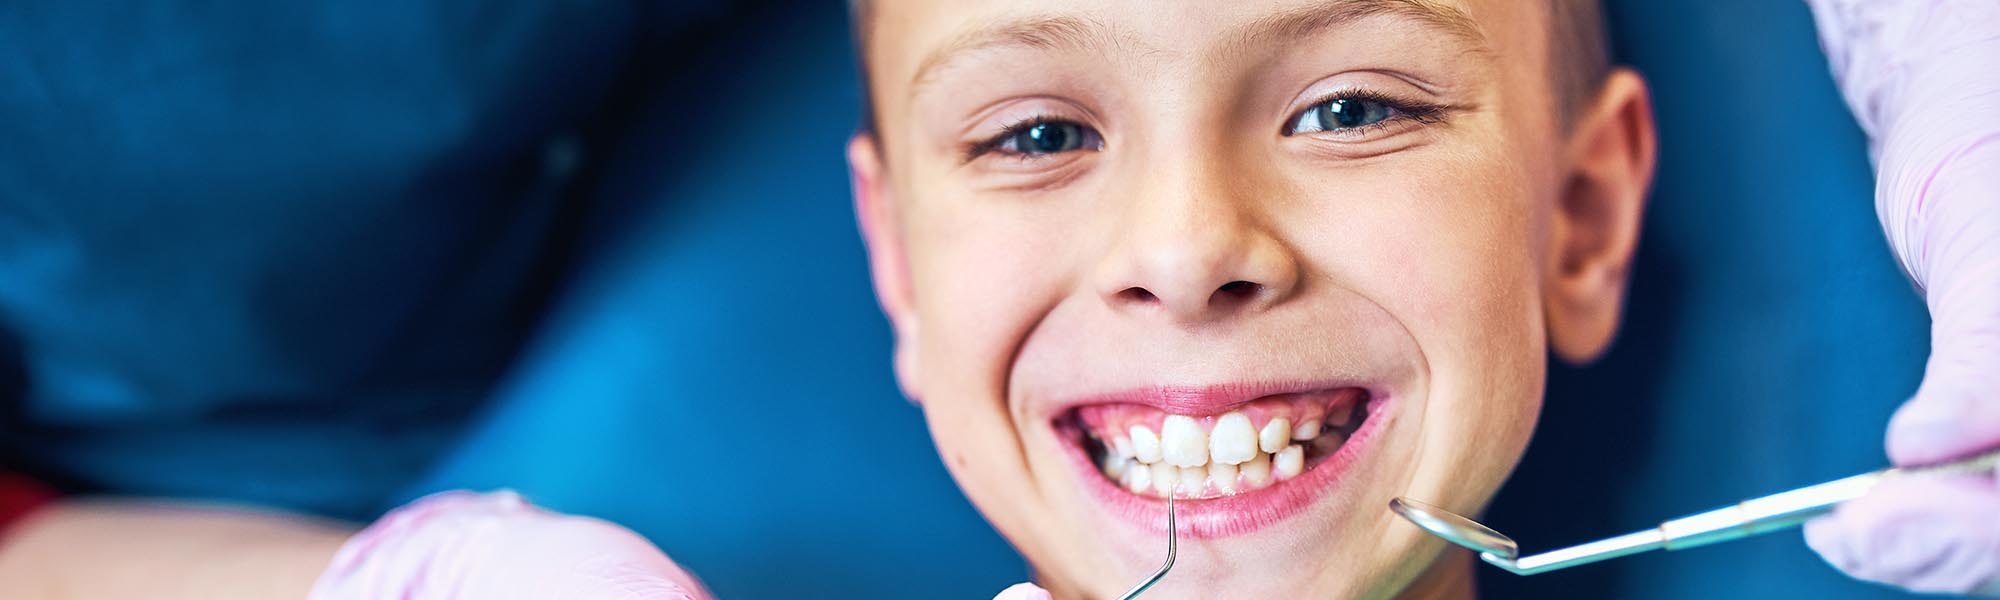 Why Your Child Should Visit a Pediatric Dentist